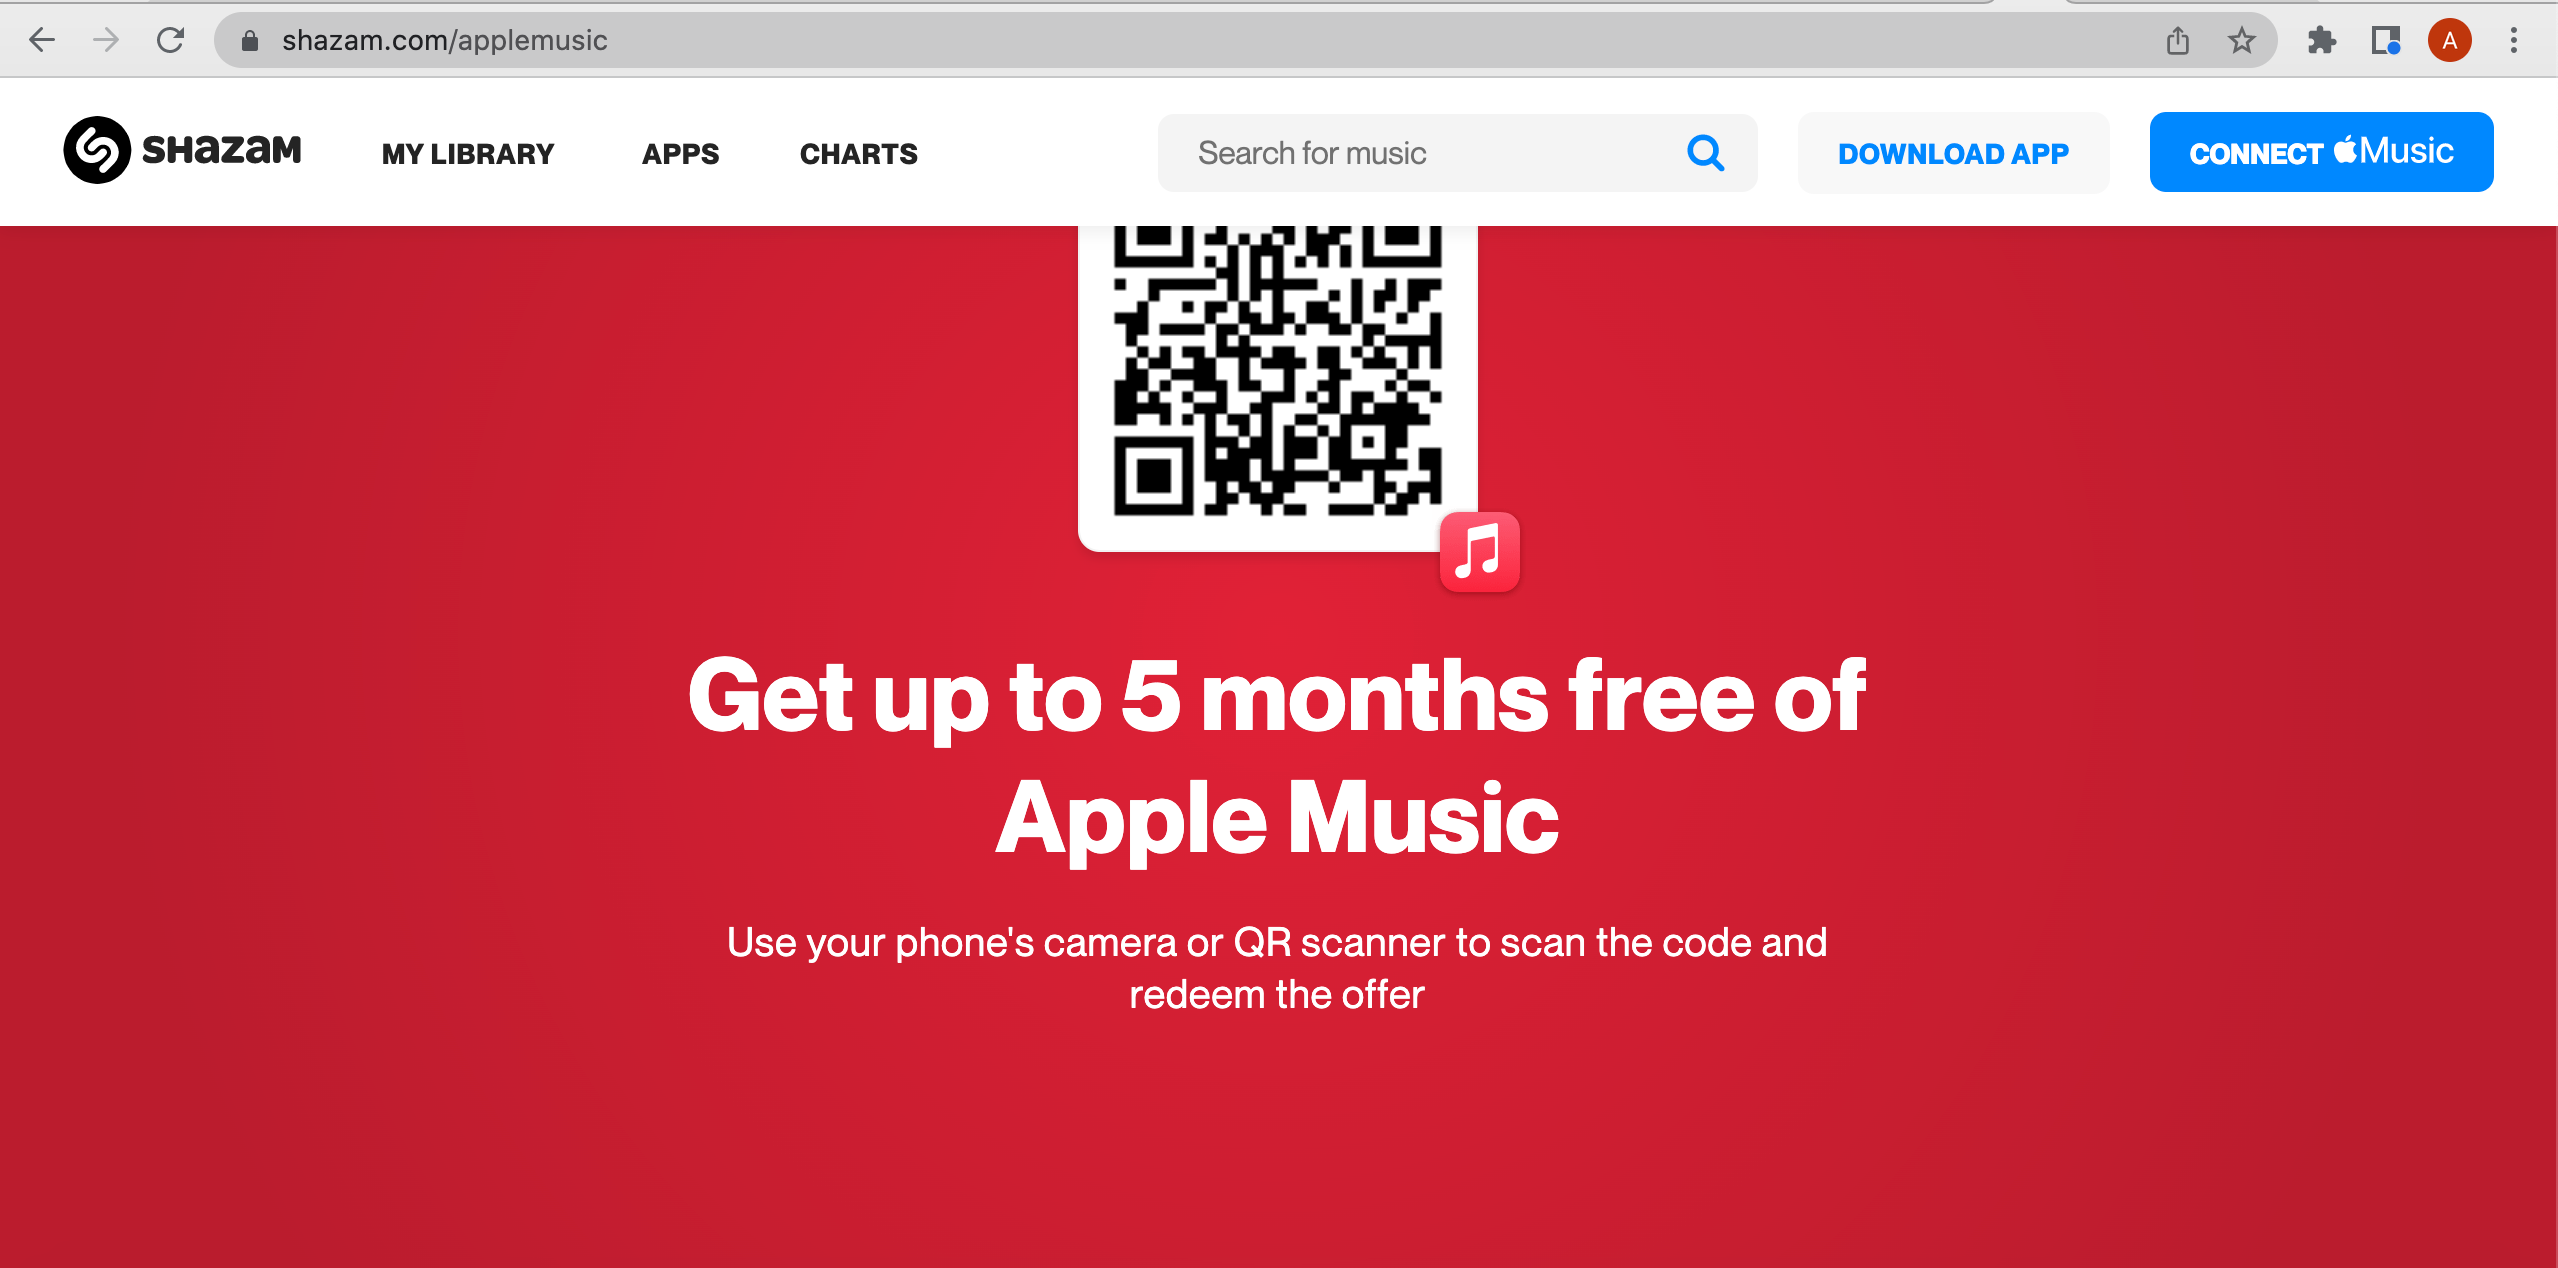 How to Get Apple Music Free for 5 Months Through Shazam